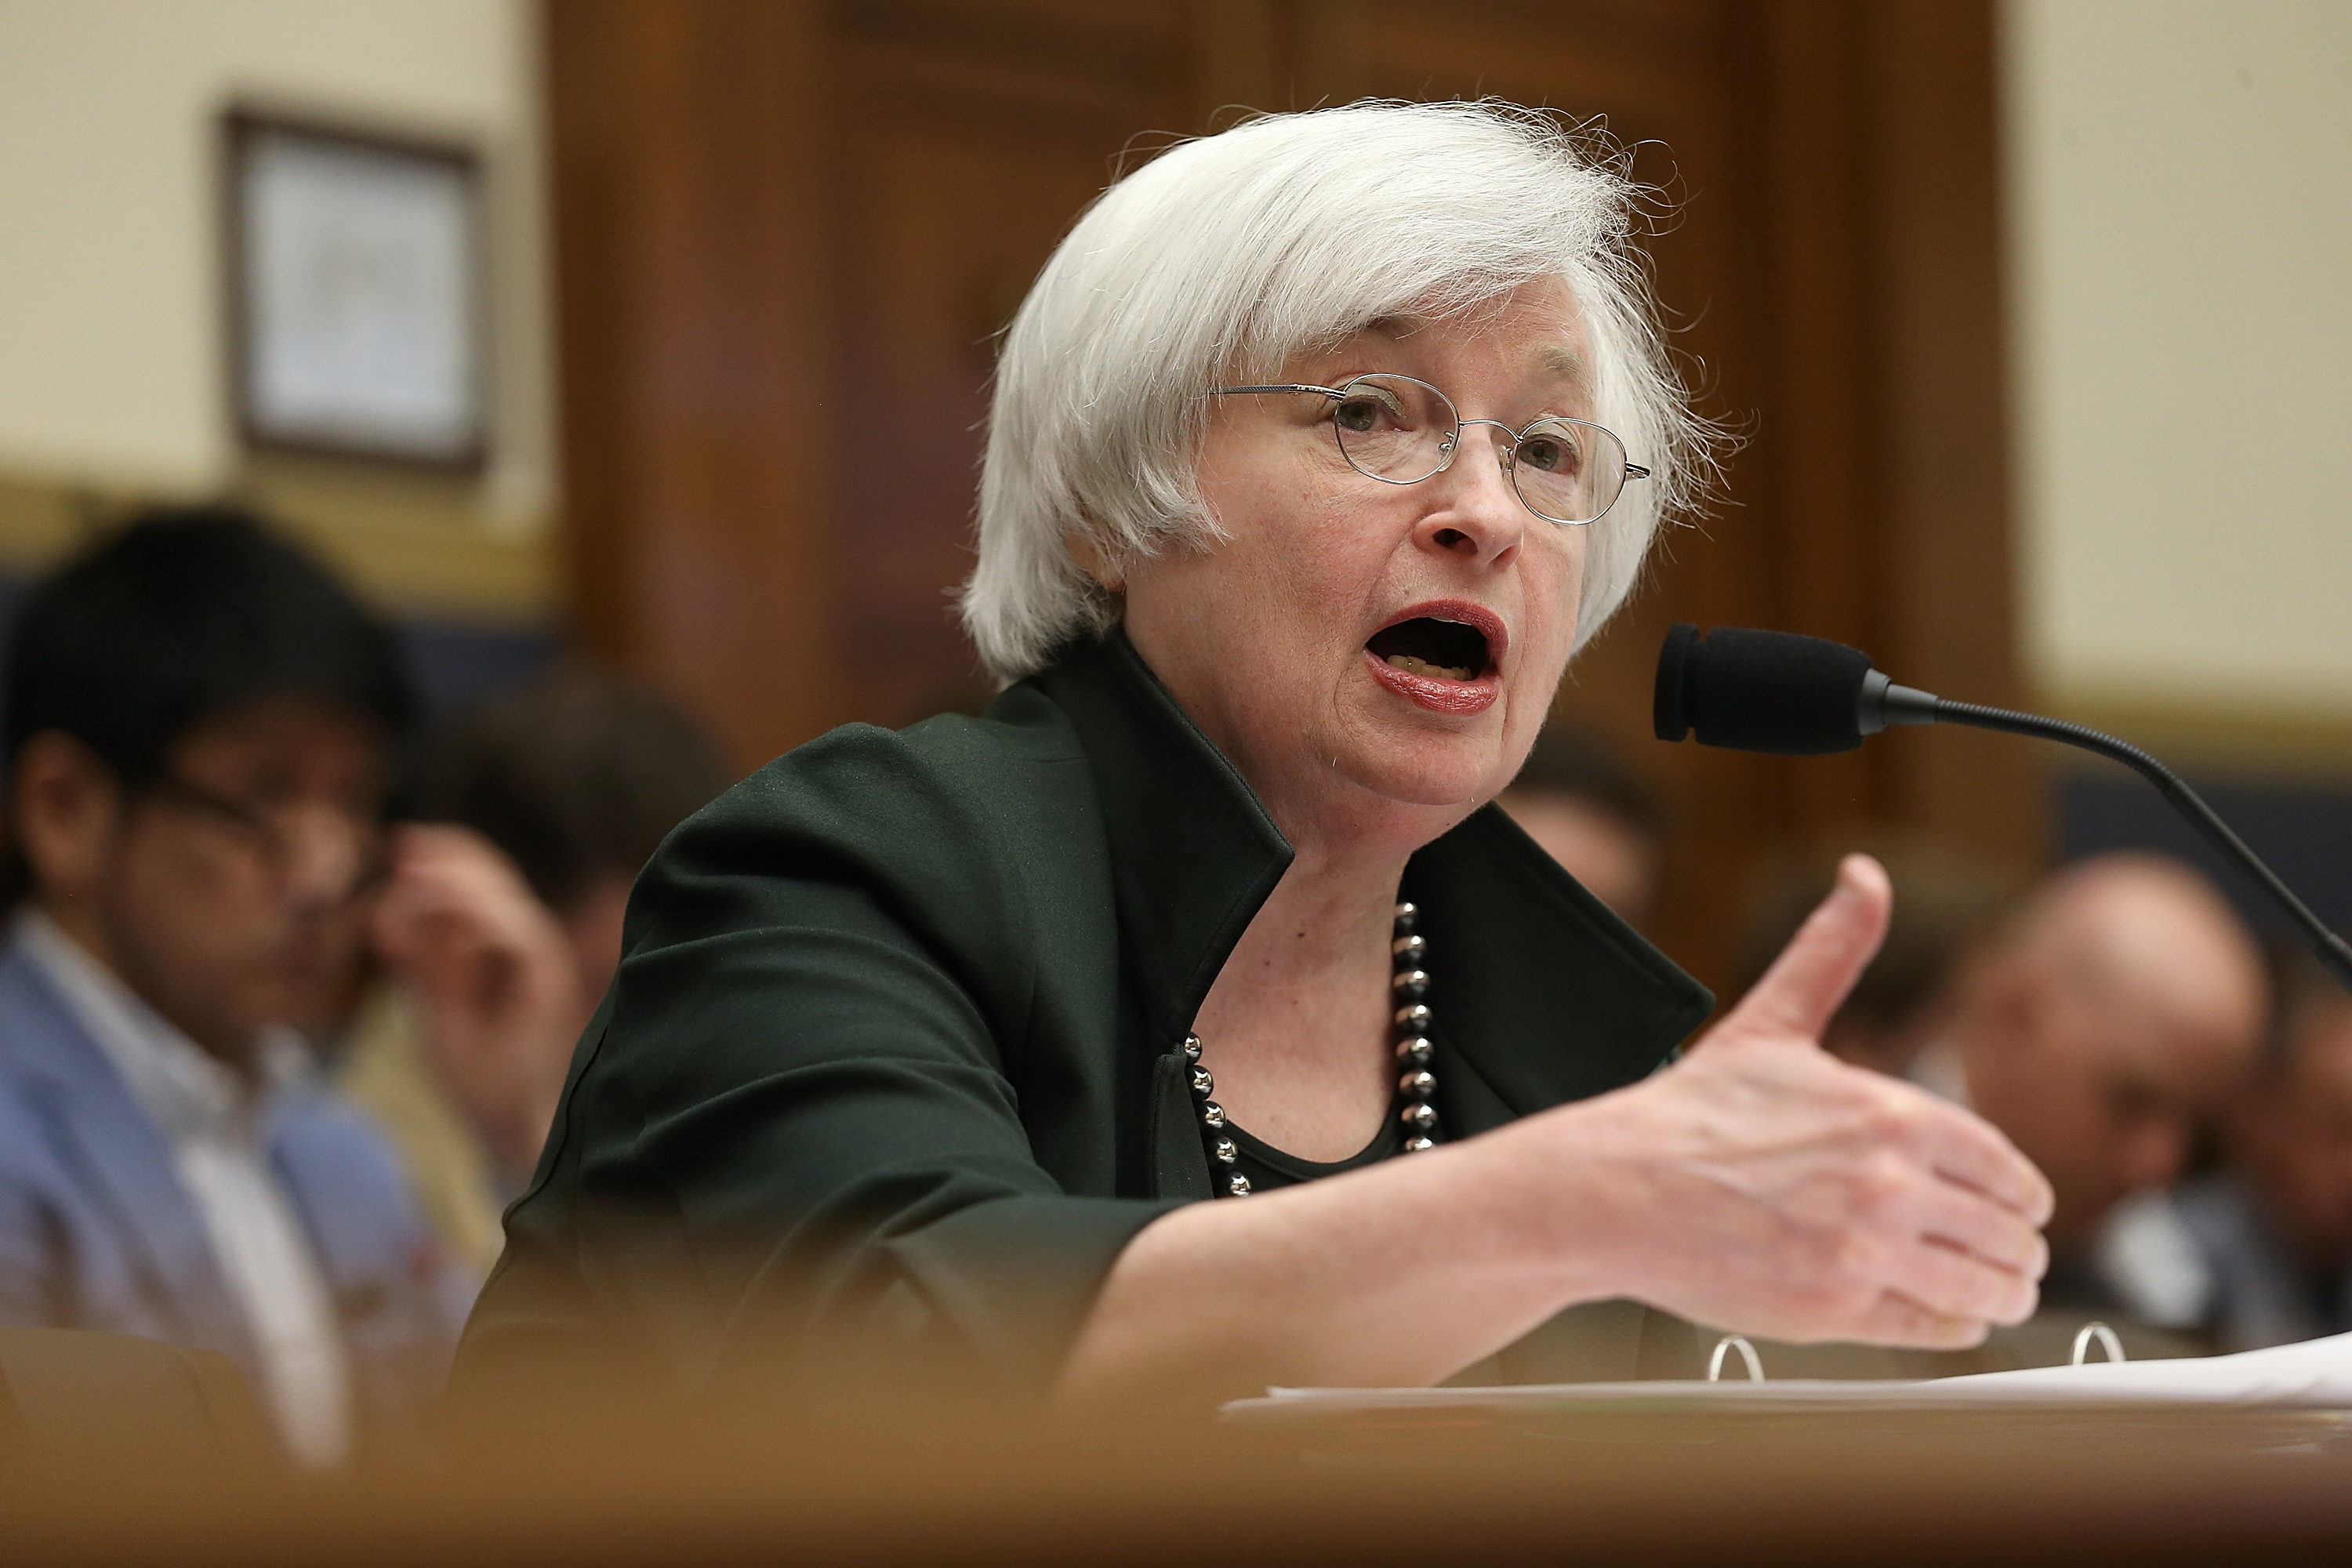 Yellen: Banks are now able to pay dividends and buy back shares